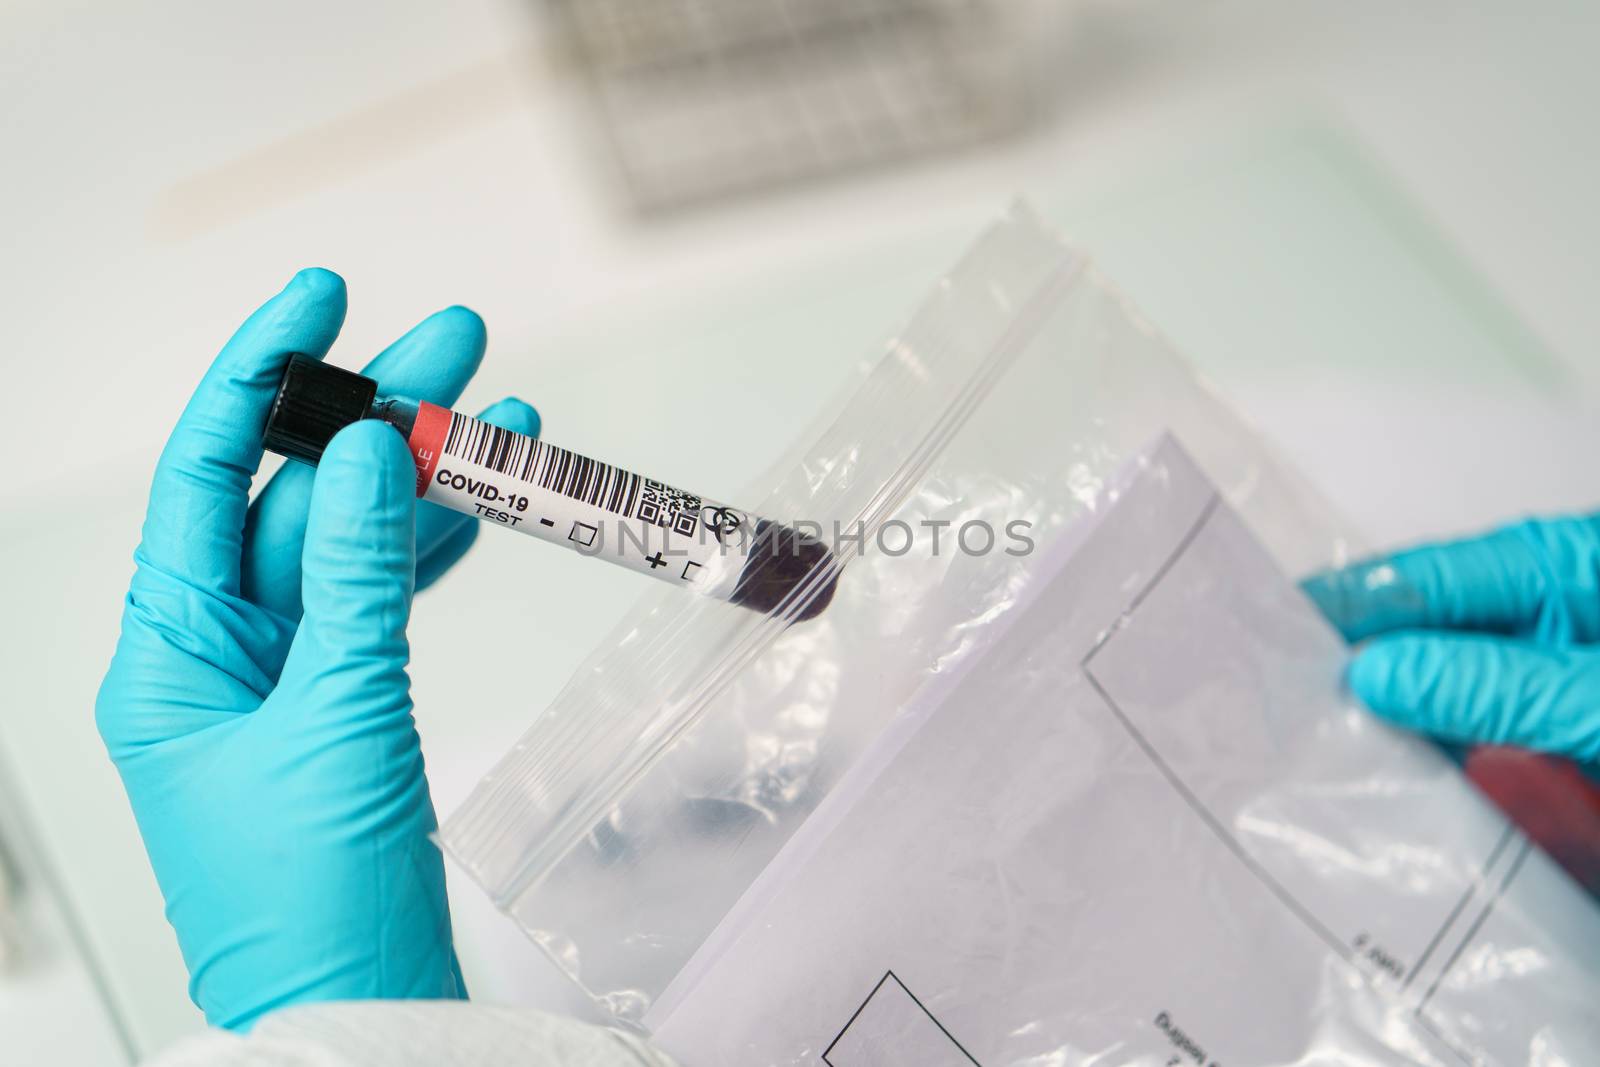 Coronavirus testing, a hand taking a tube of blood test samples by sirawit99